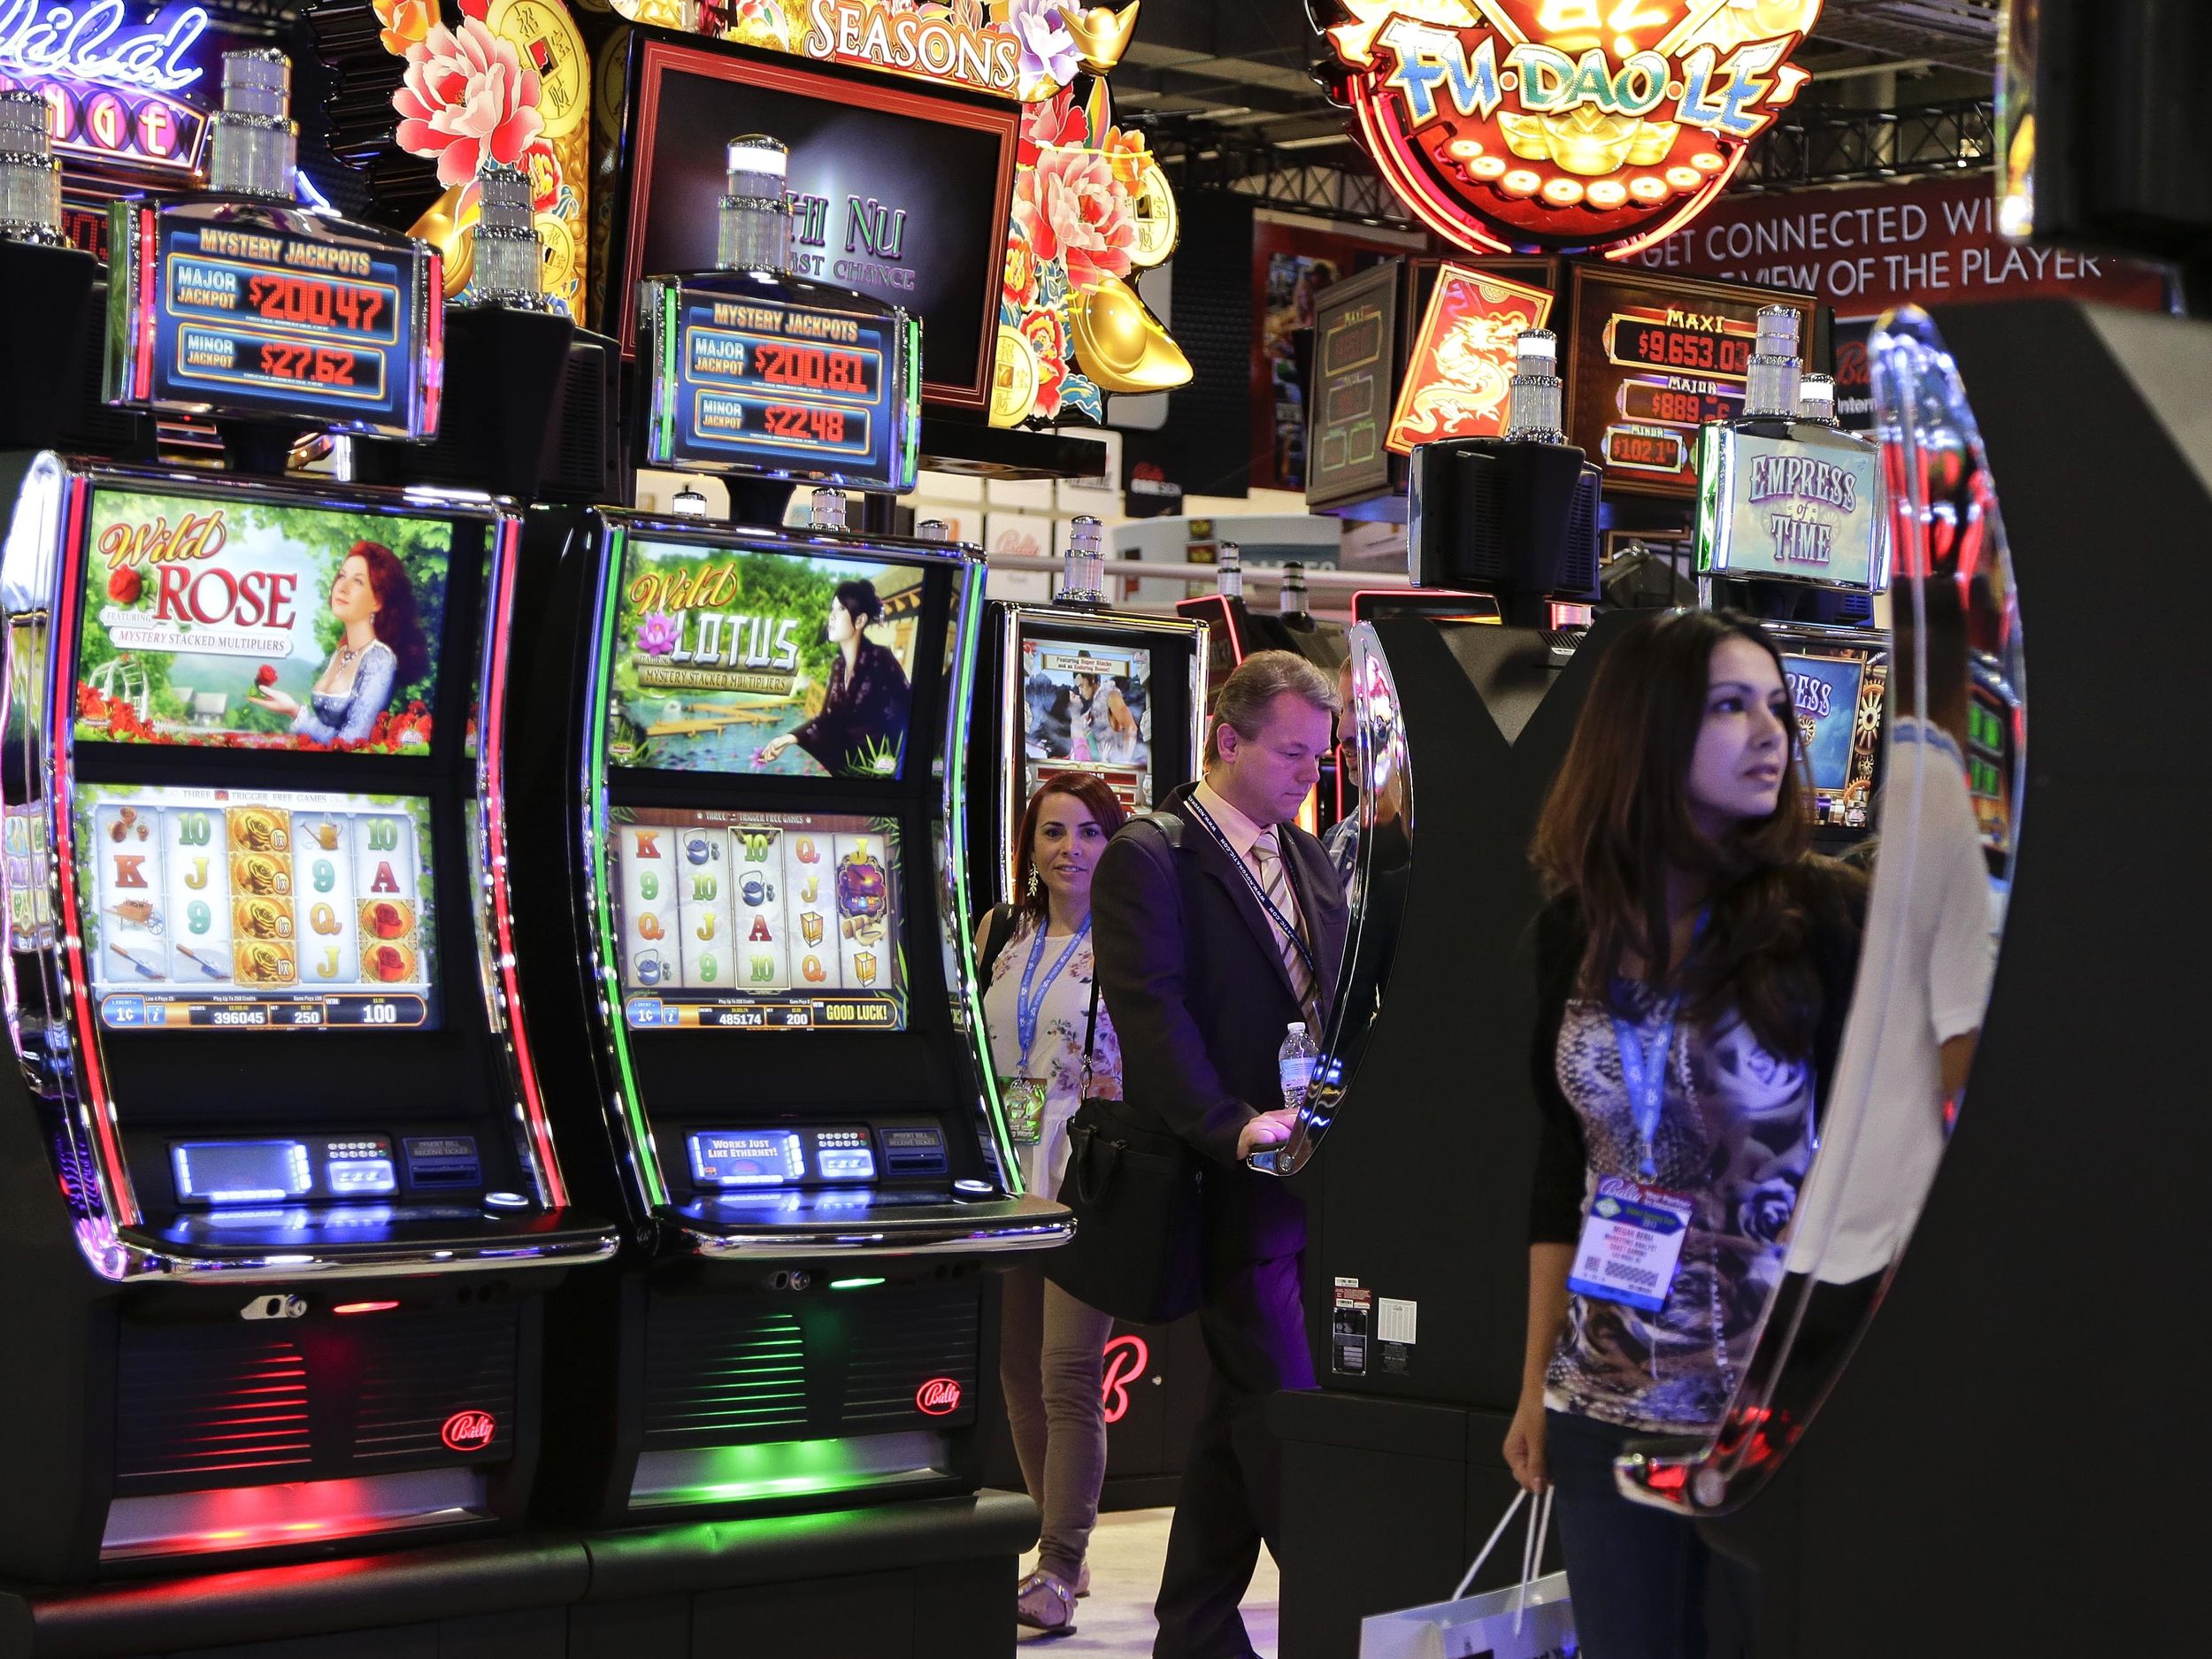 Video game-themed slot machines catching on with casinos | The  Spokesman-Review